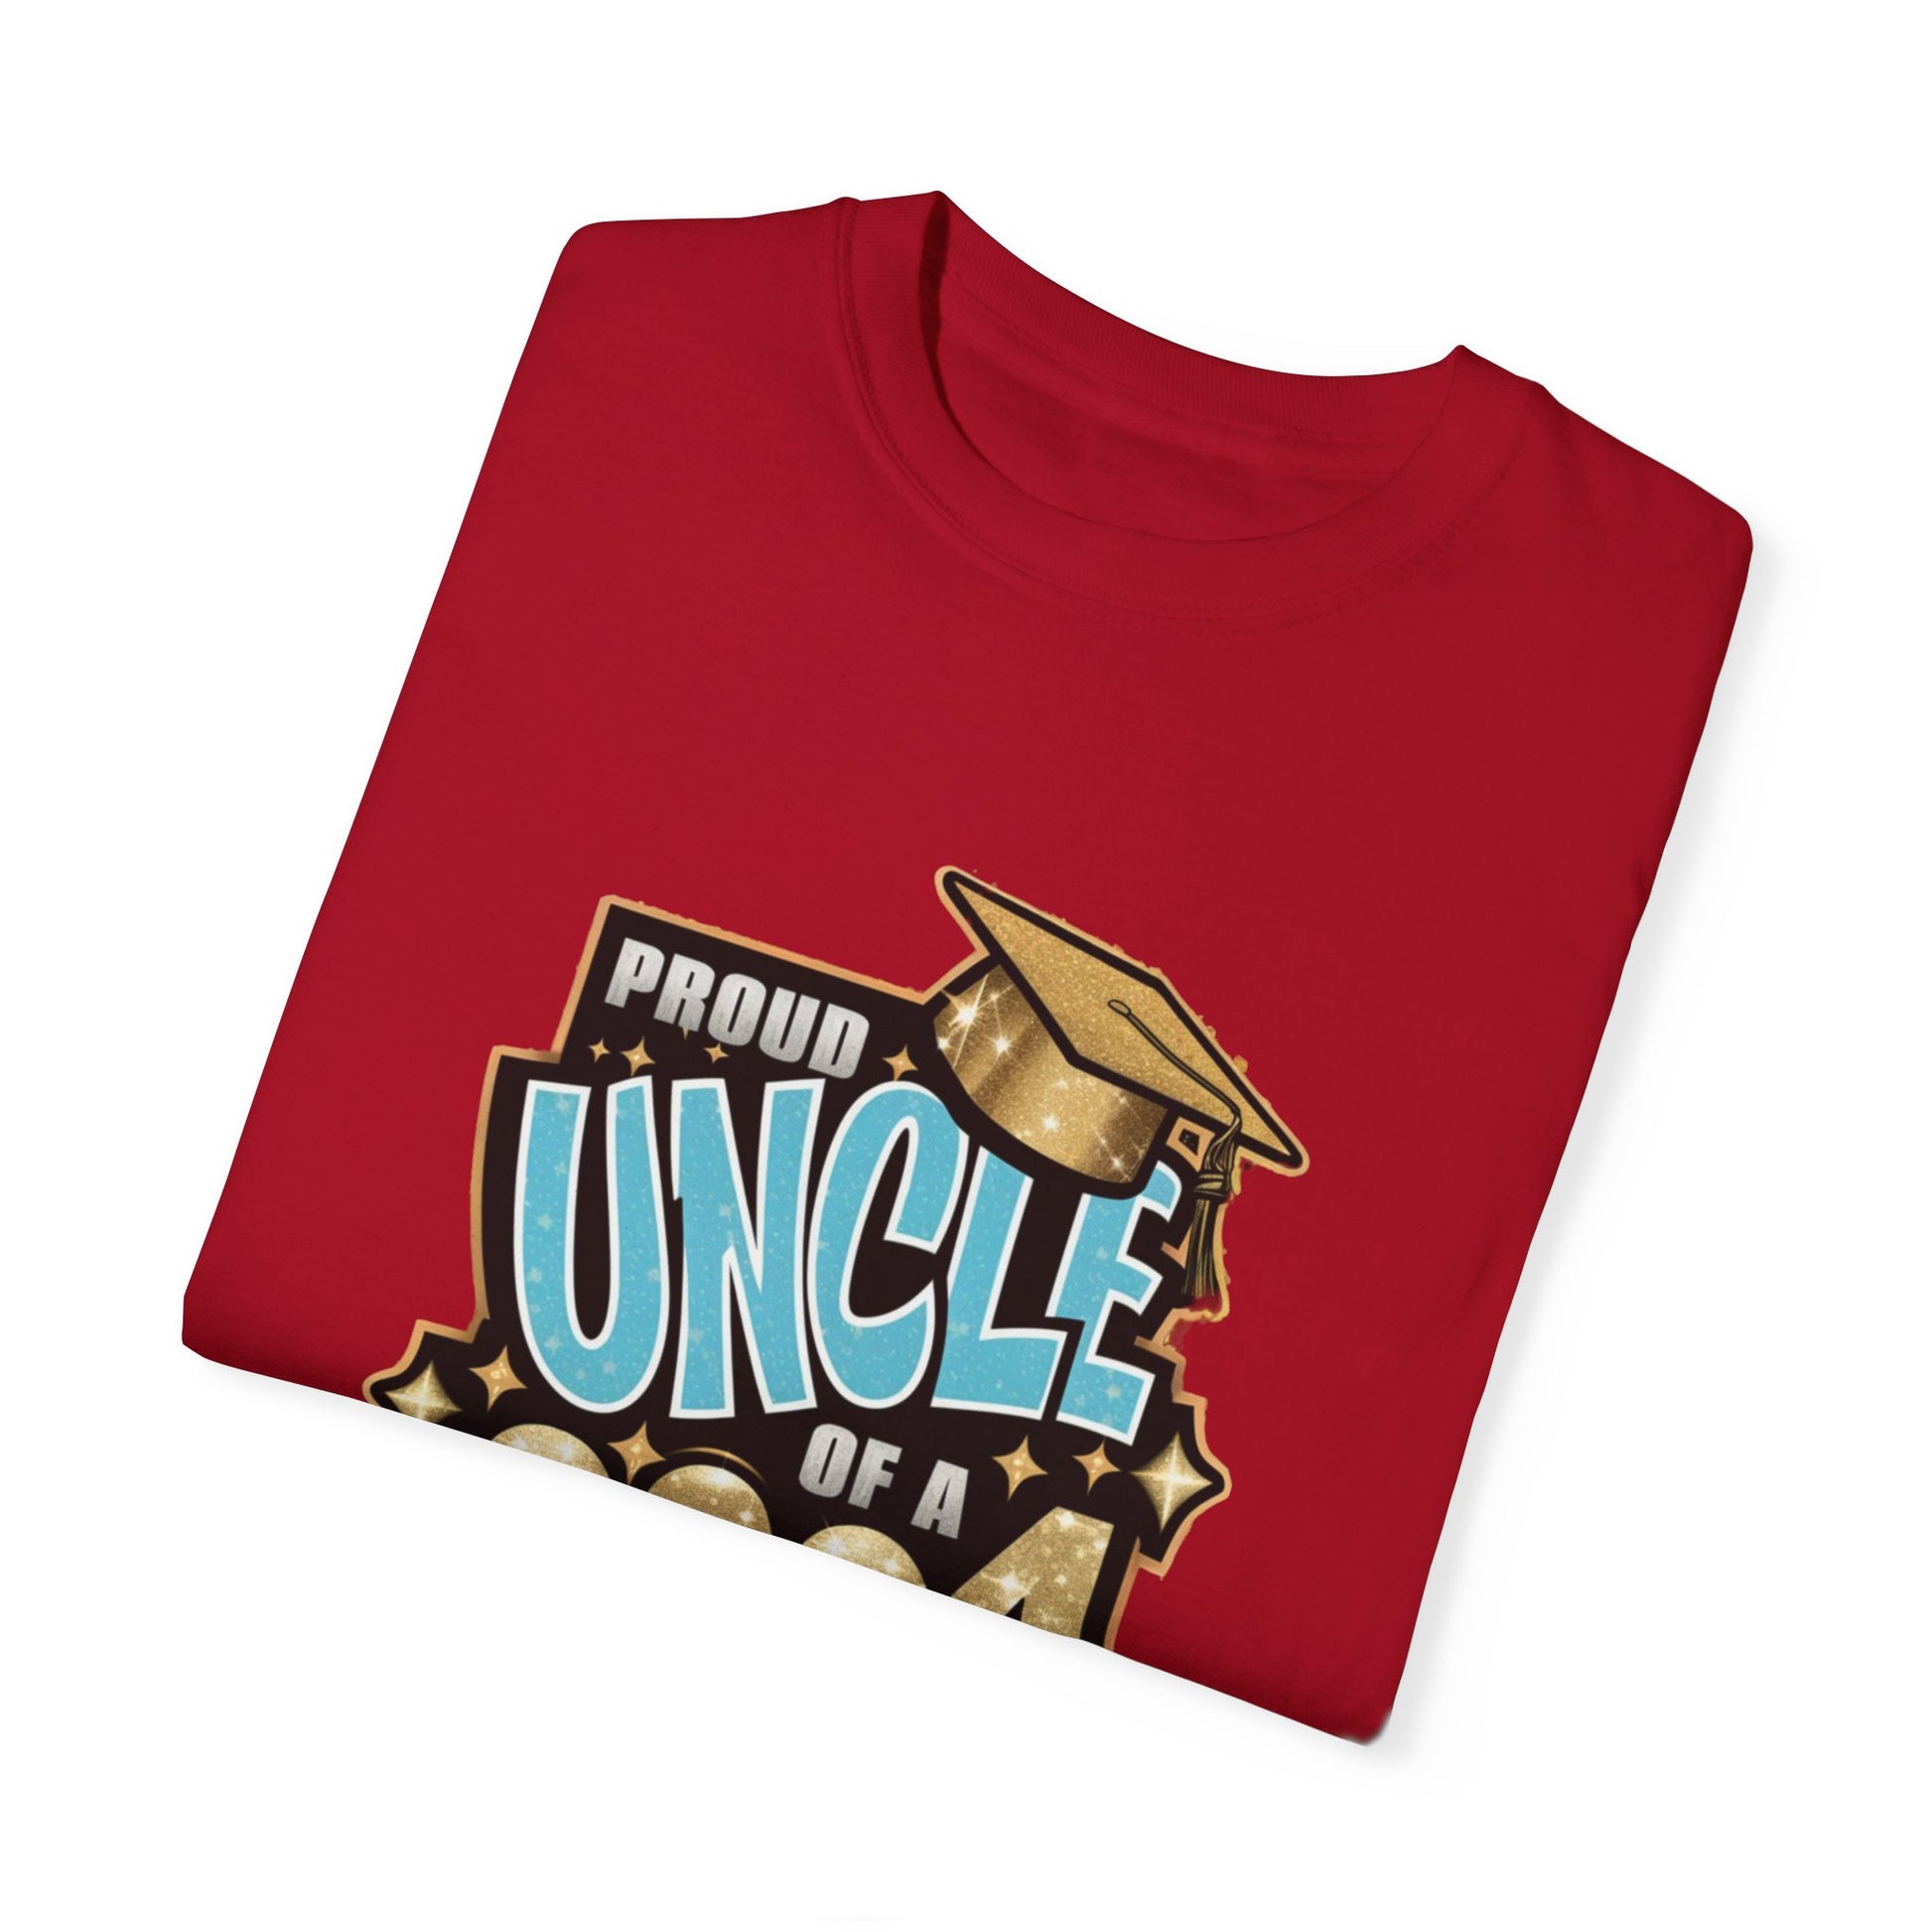 Proud Uncle of a 2024 Graduate Unisex Garment-dyed T-shirt Cotton Funny Humorous Graphic Soft Premium Unisex Men Women Red T-shirt Birthday Gift-20